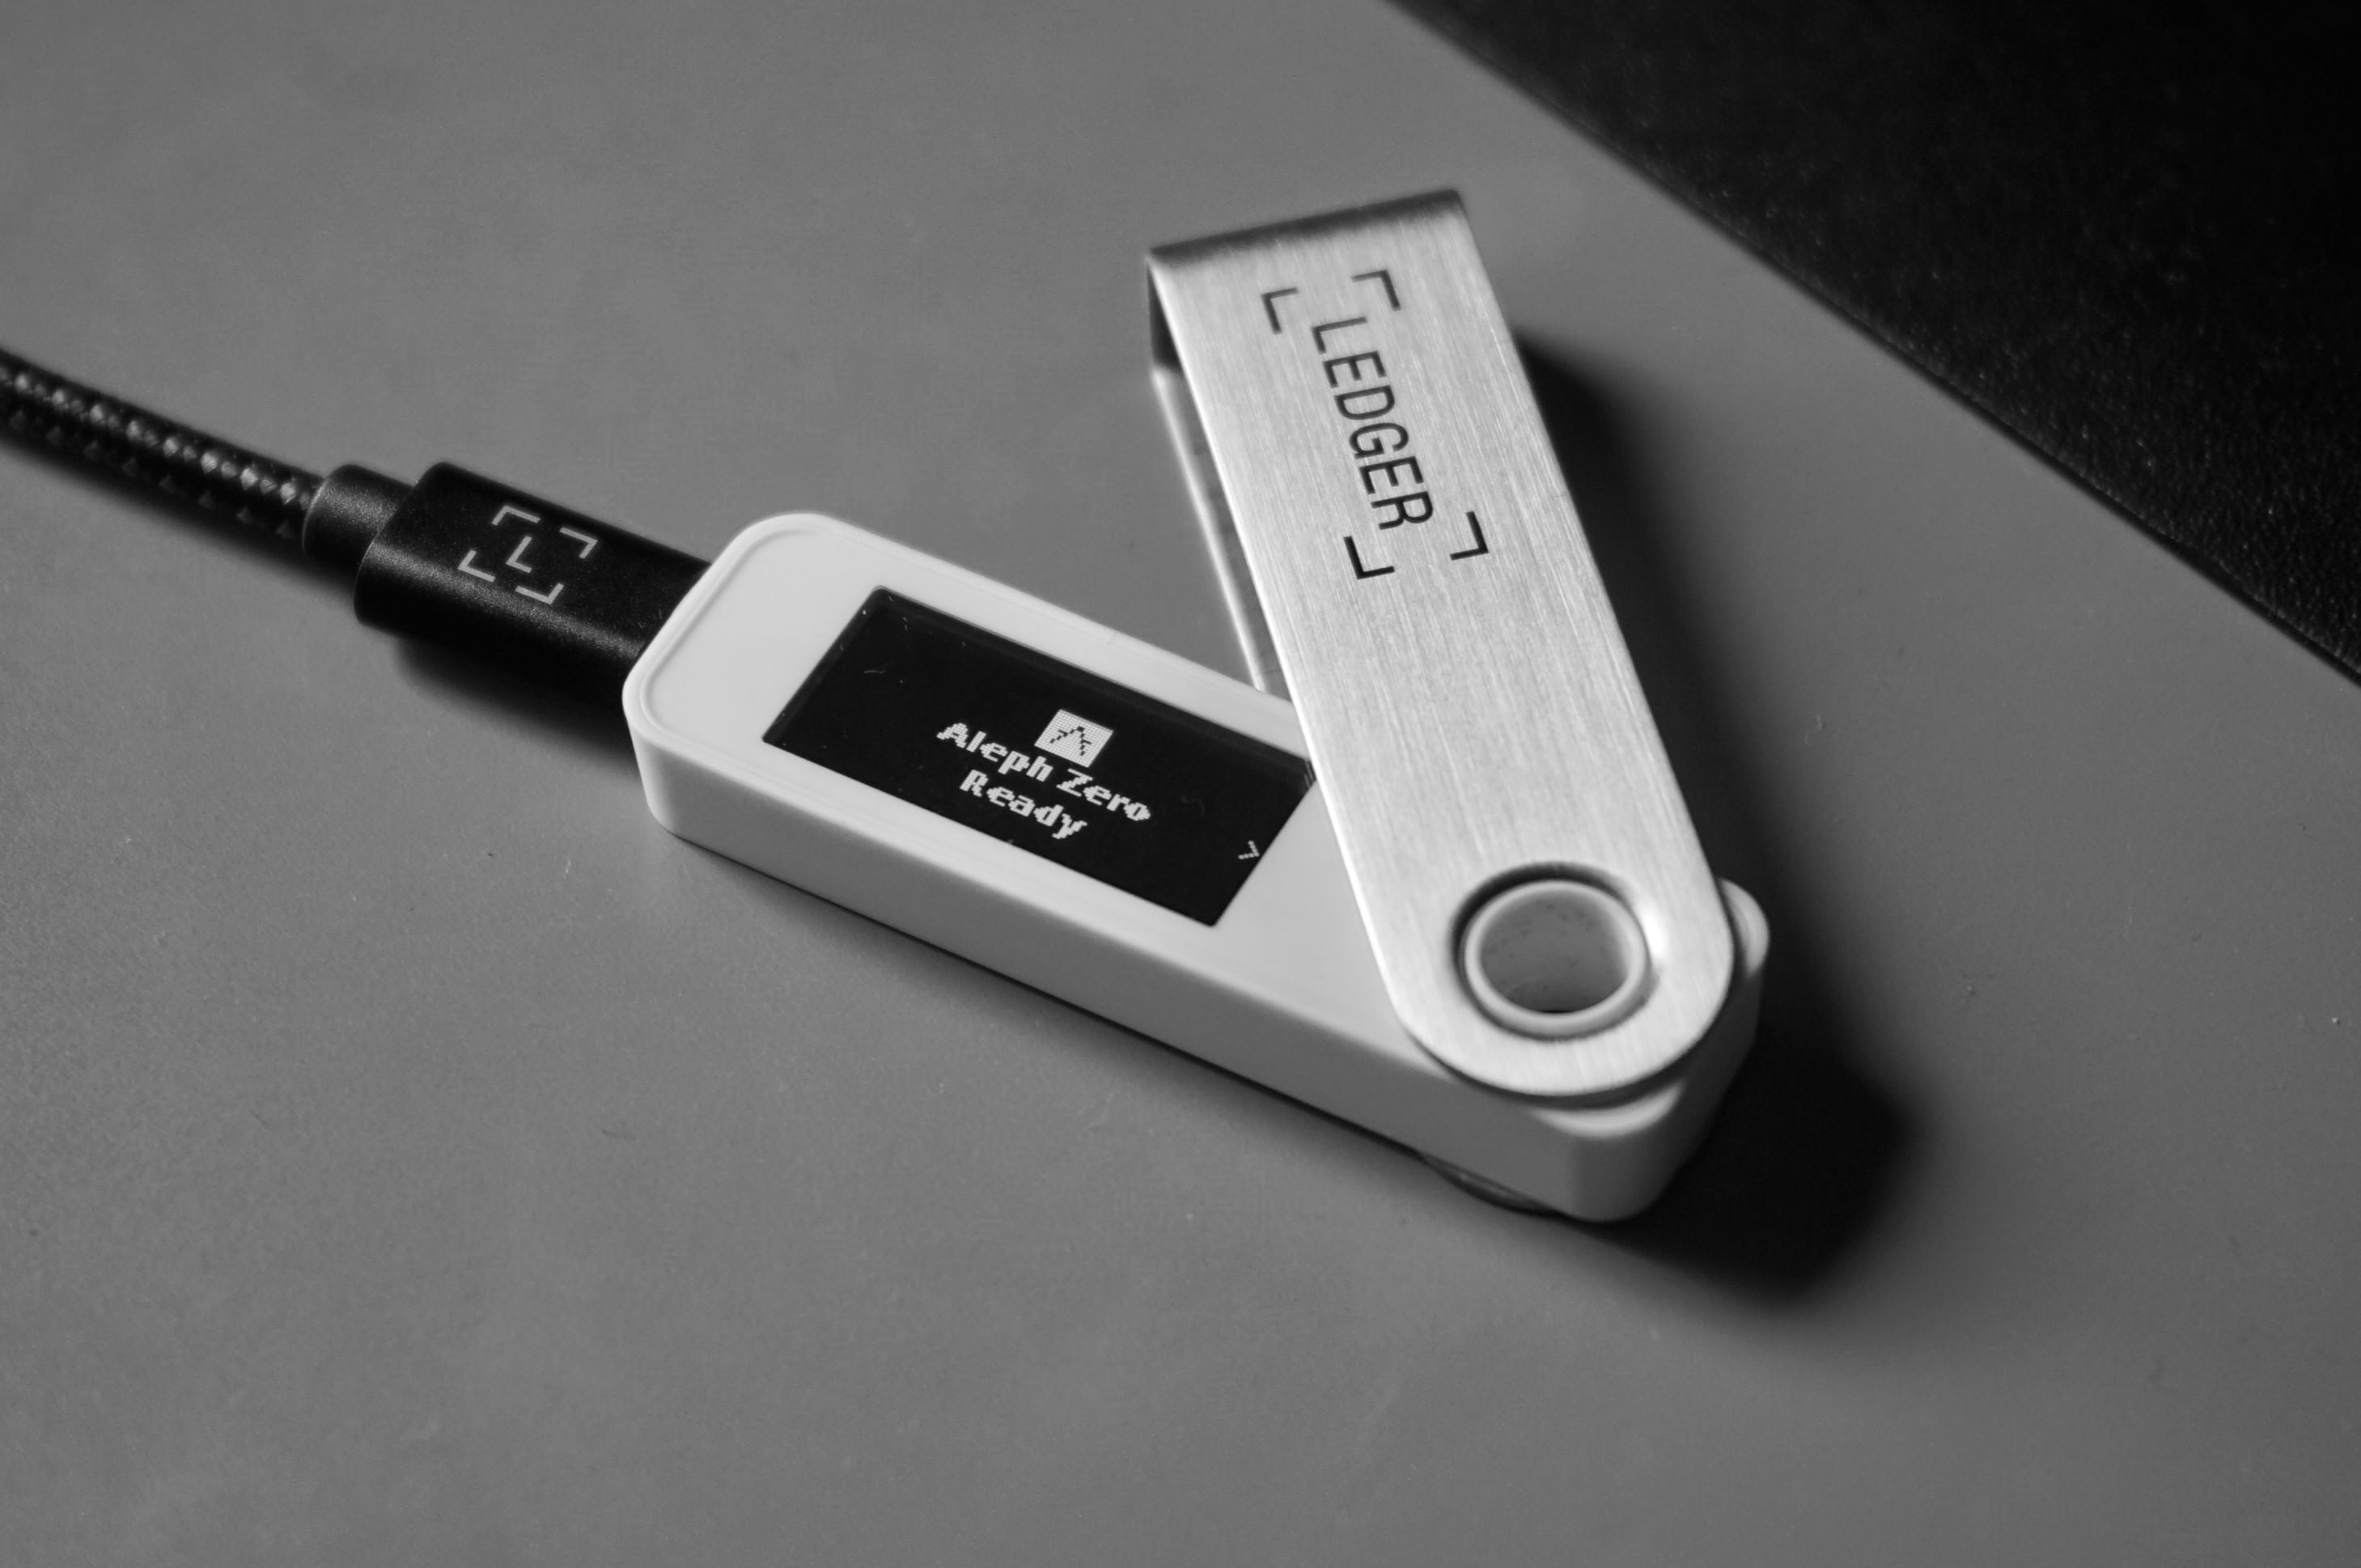 How To Connect Ledger Nano S To Ledger Wallet